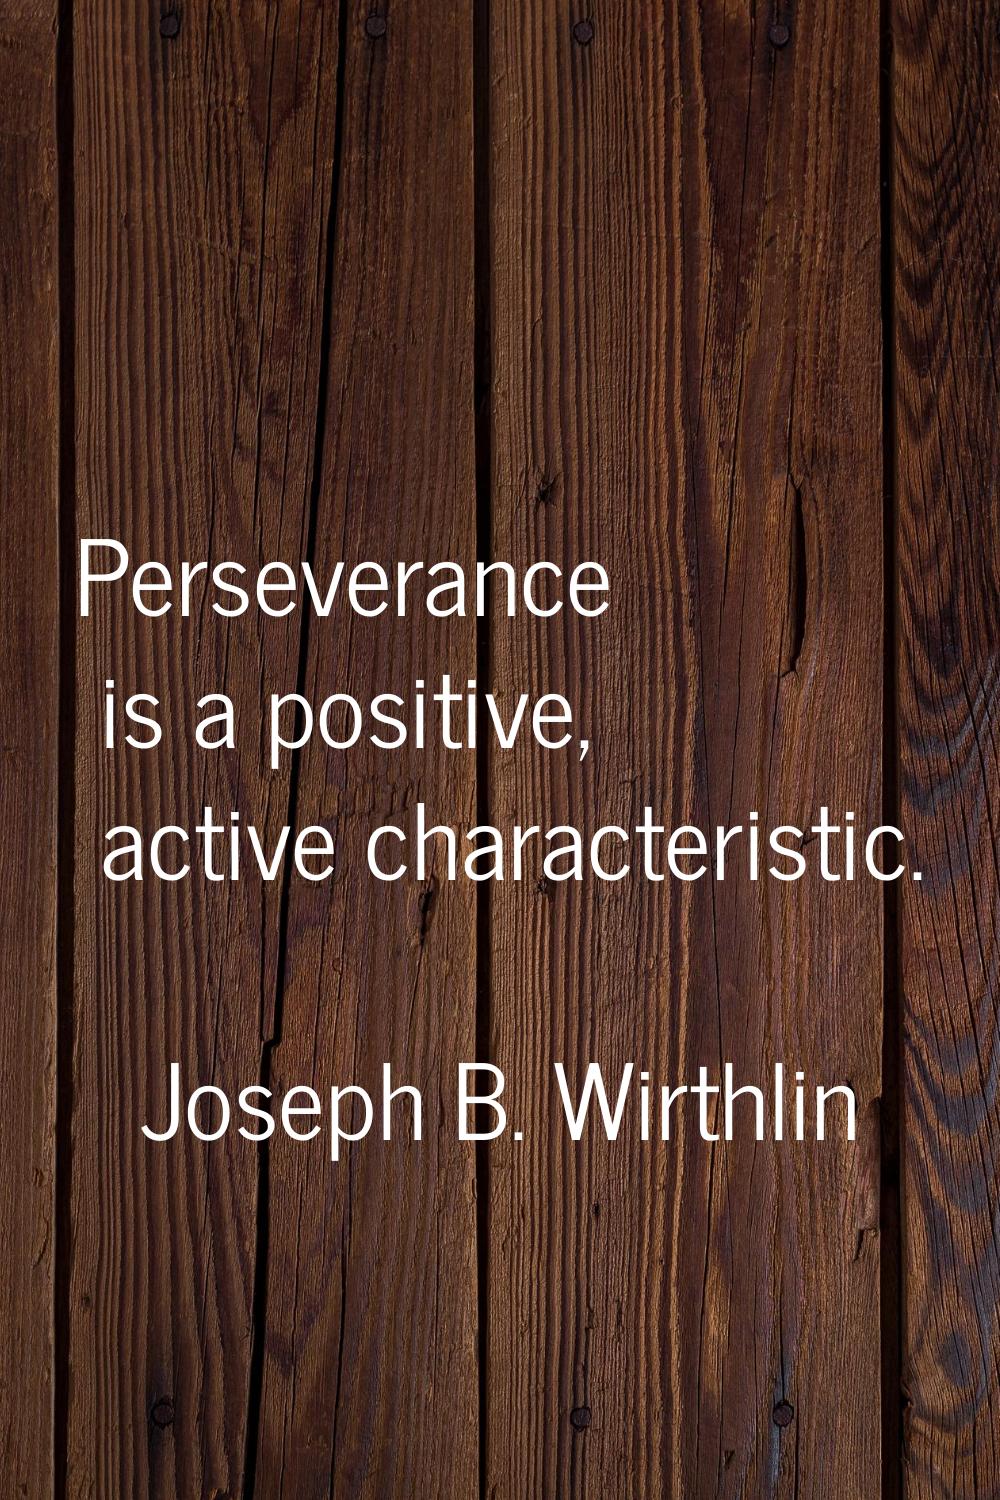 Perseverance is a positive, active characteristic.